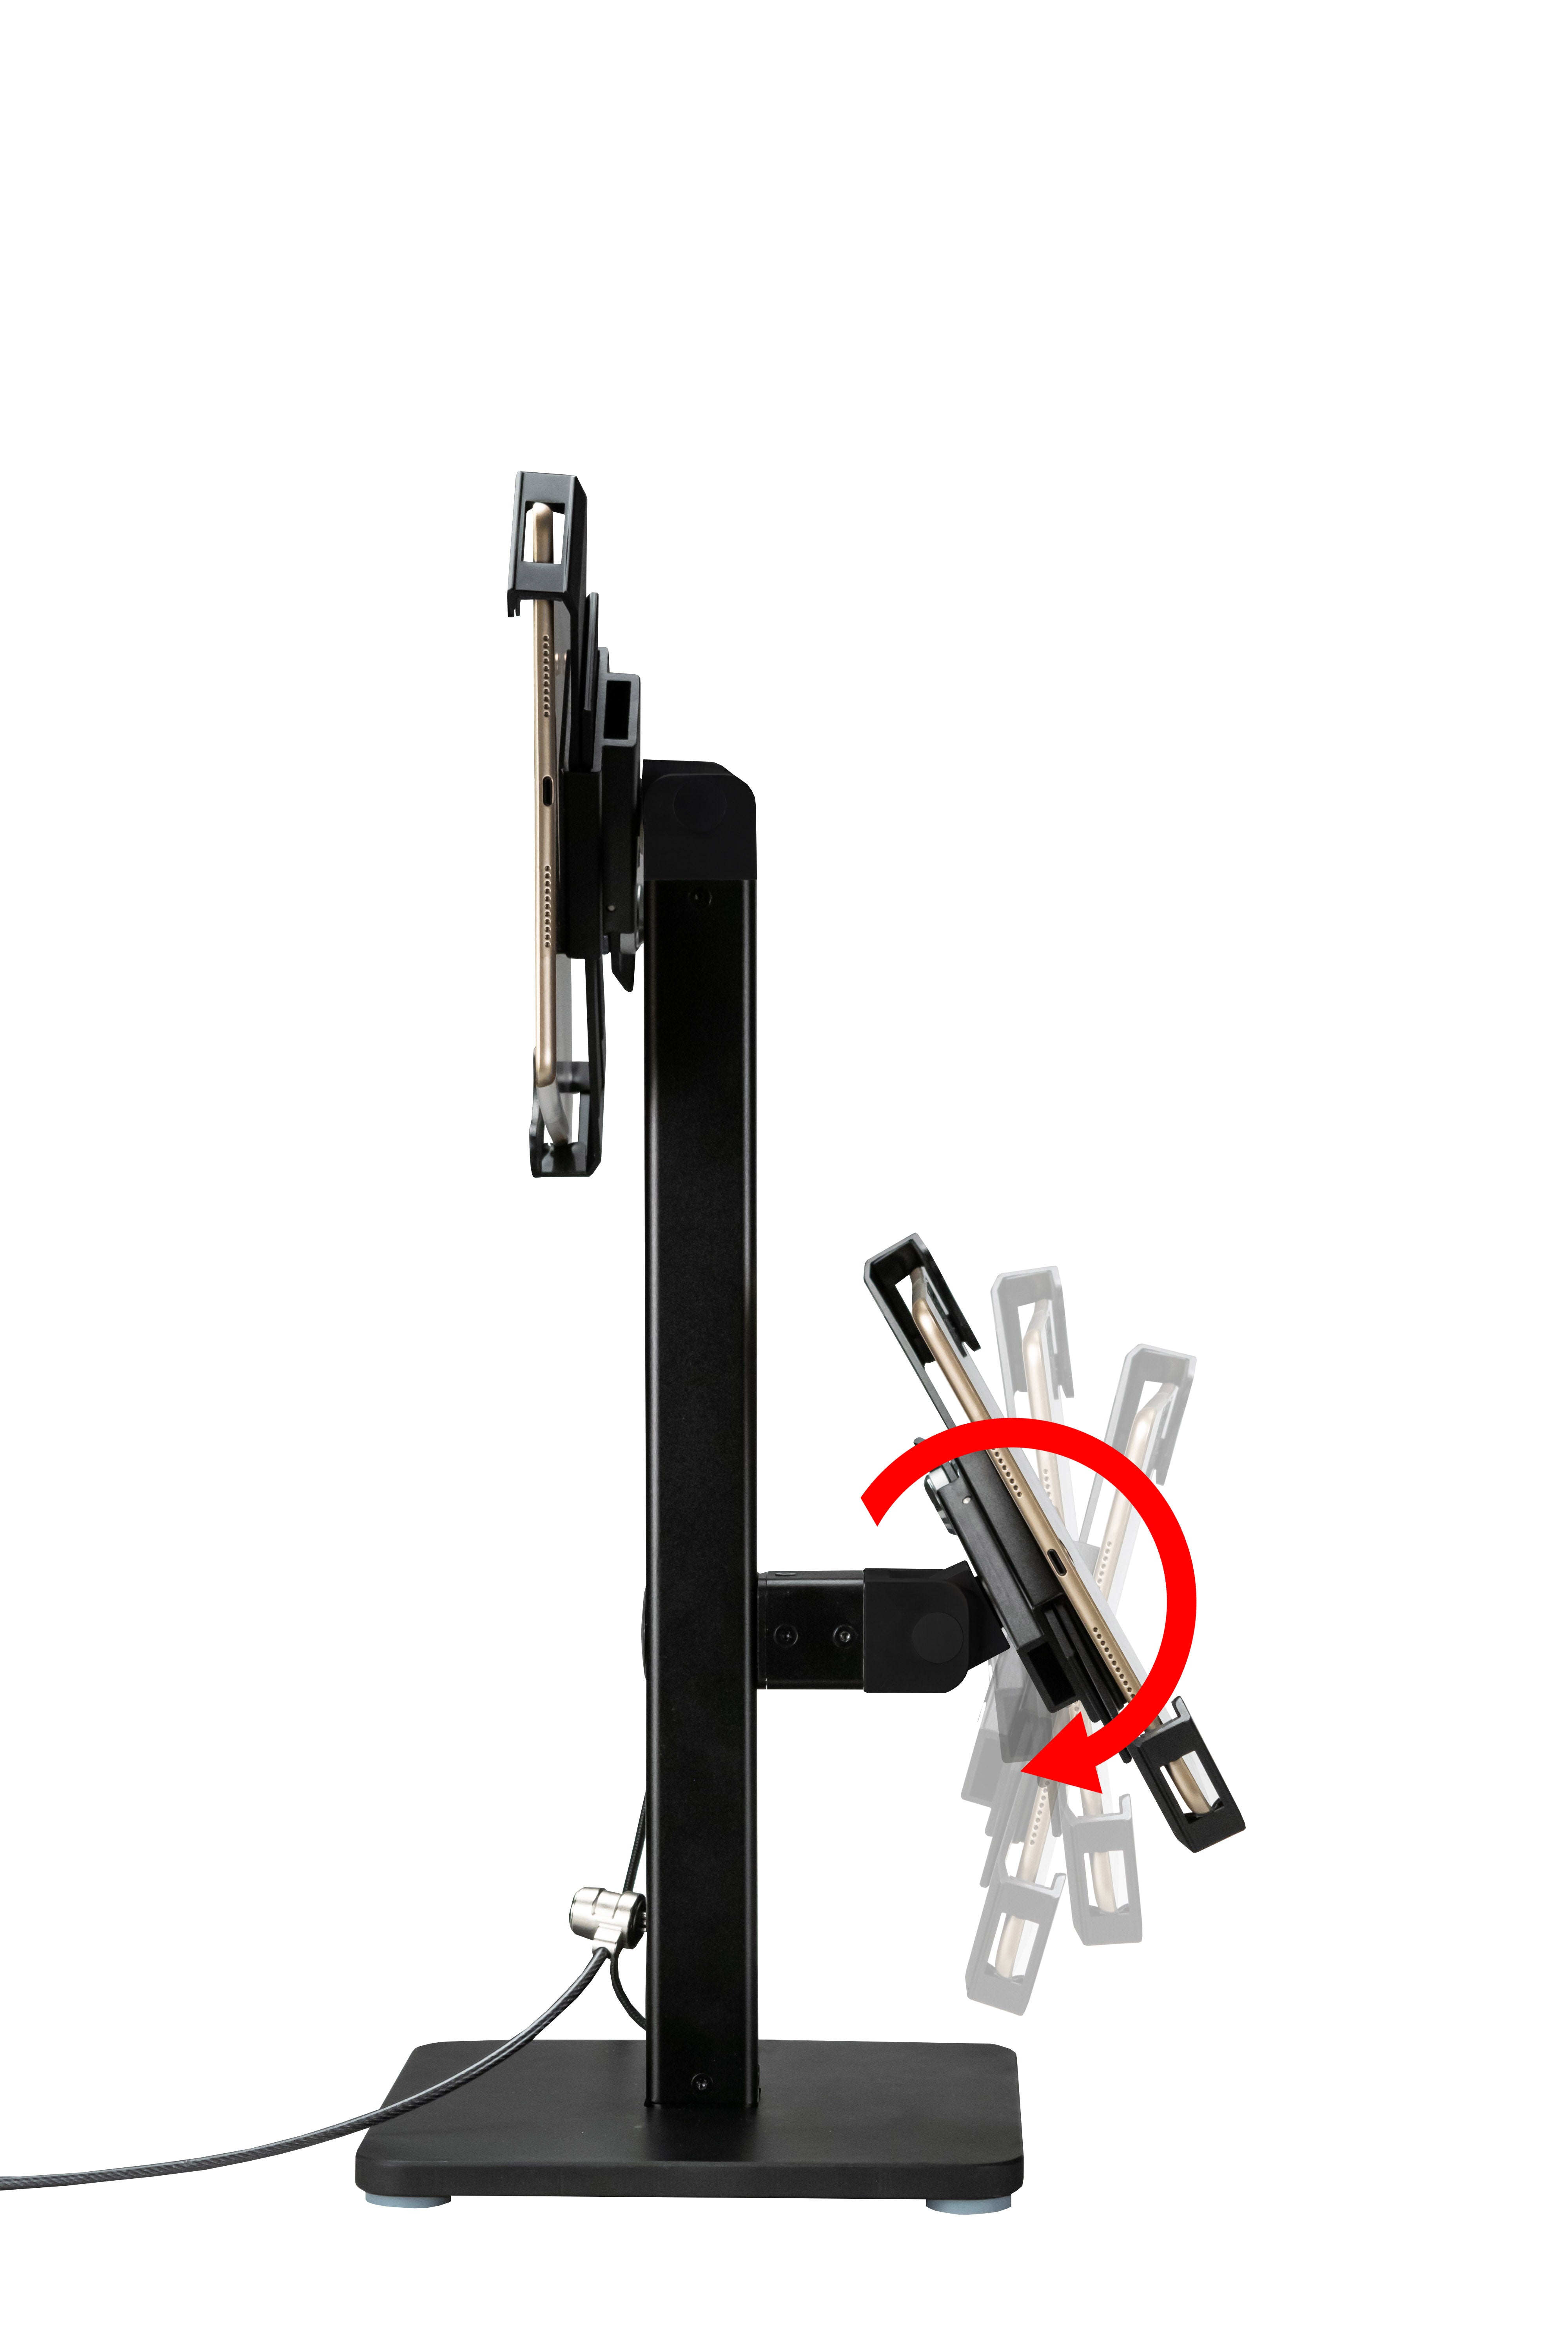 Angle-Adjustable Twin Tablet Stand for 7-10.2 Inch Tablets, including the iPad 7th/ 8th/ 9th Gen.